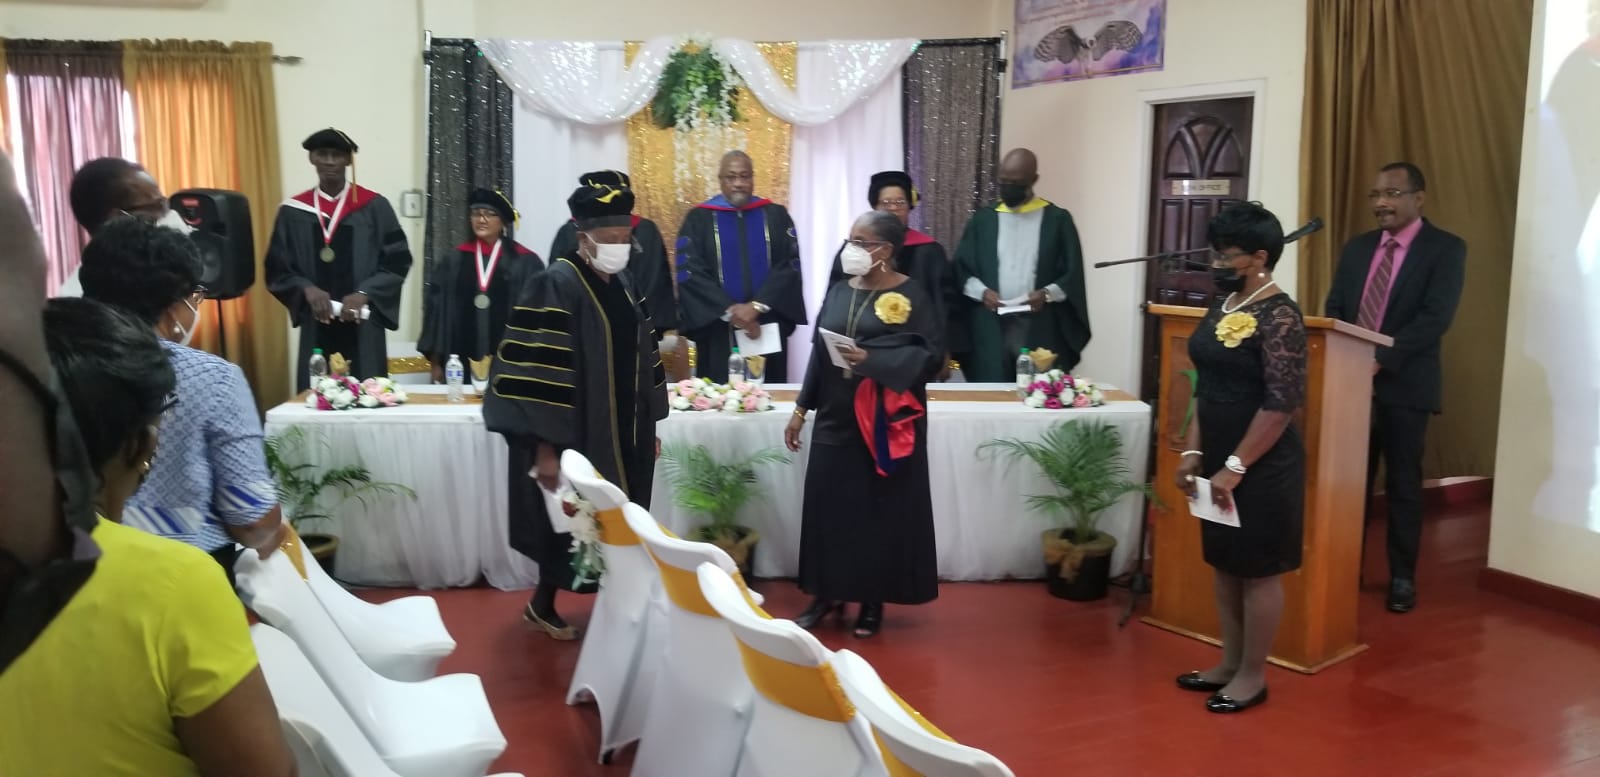 Our 79 Year Old DTL Graduate from Guyana